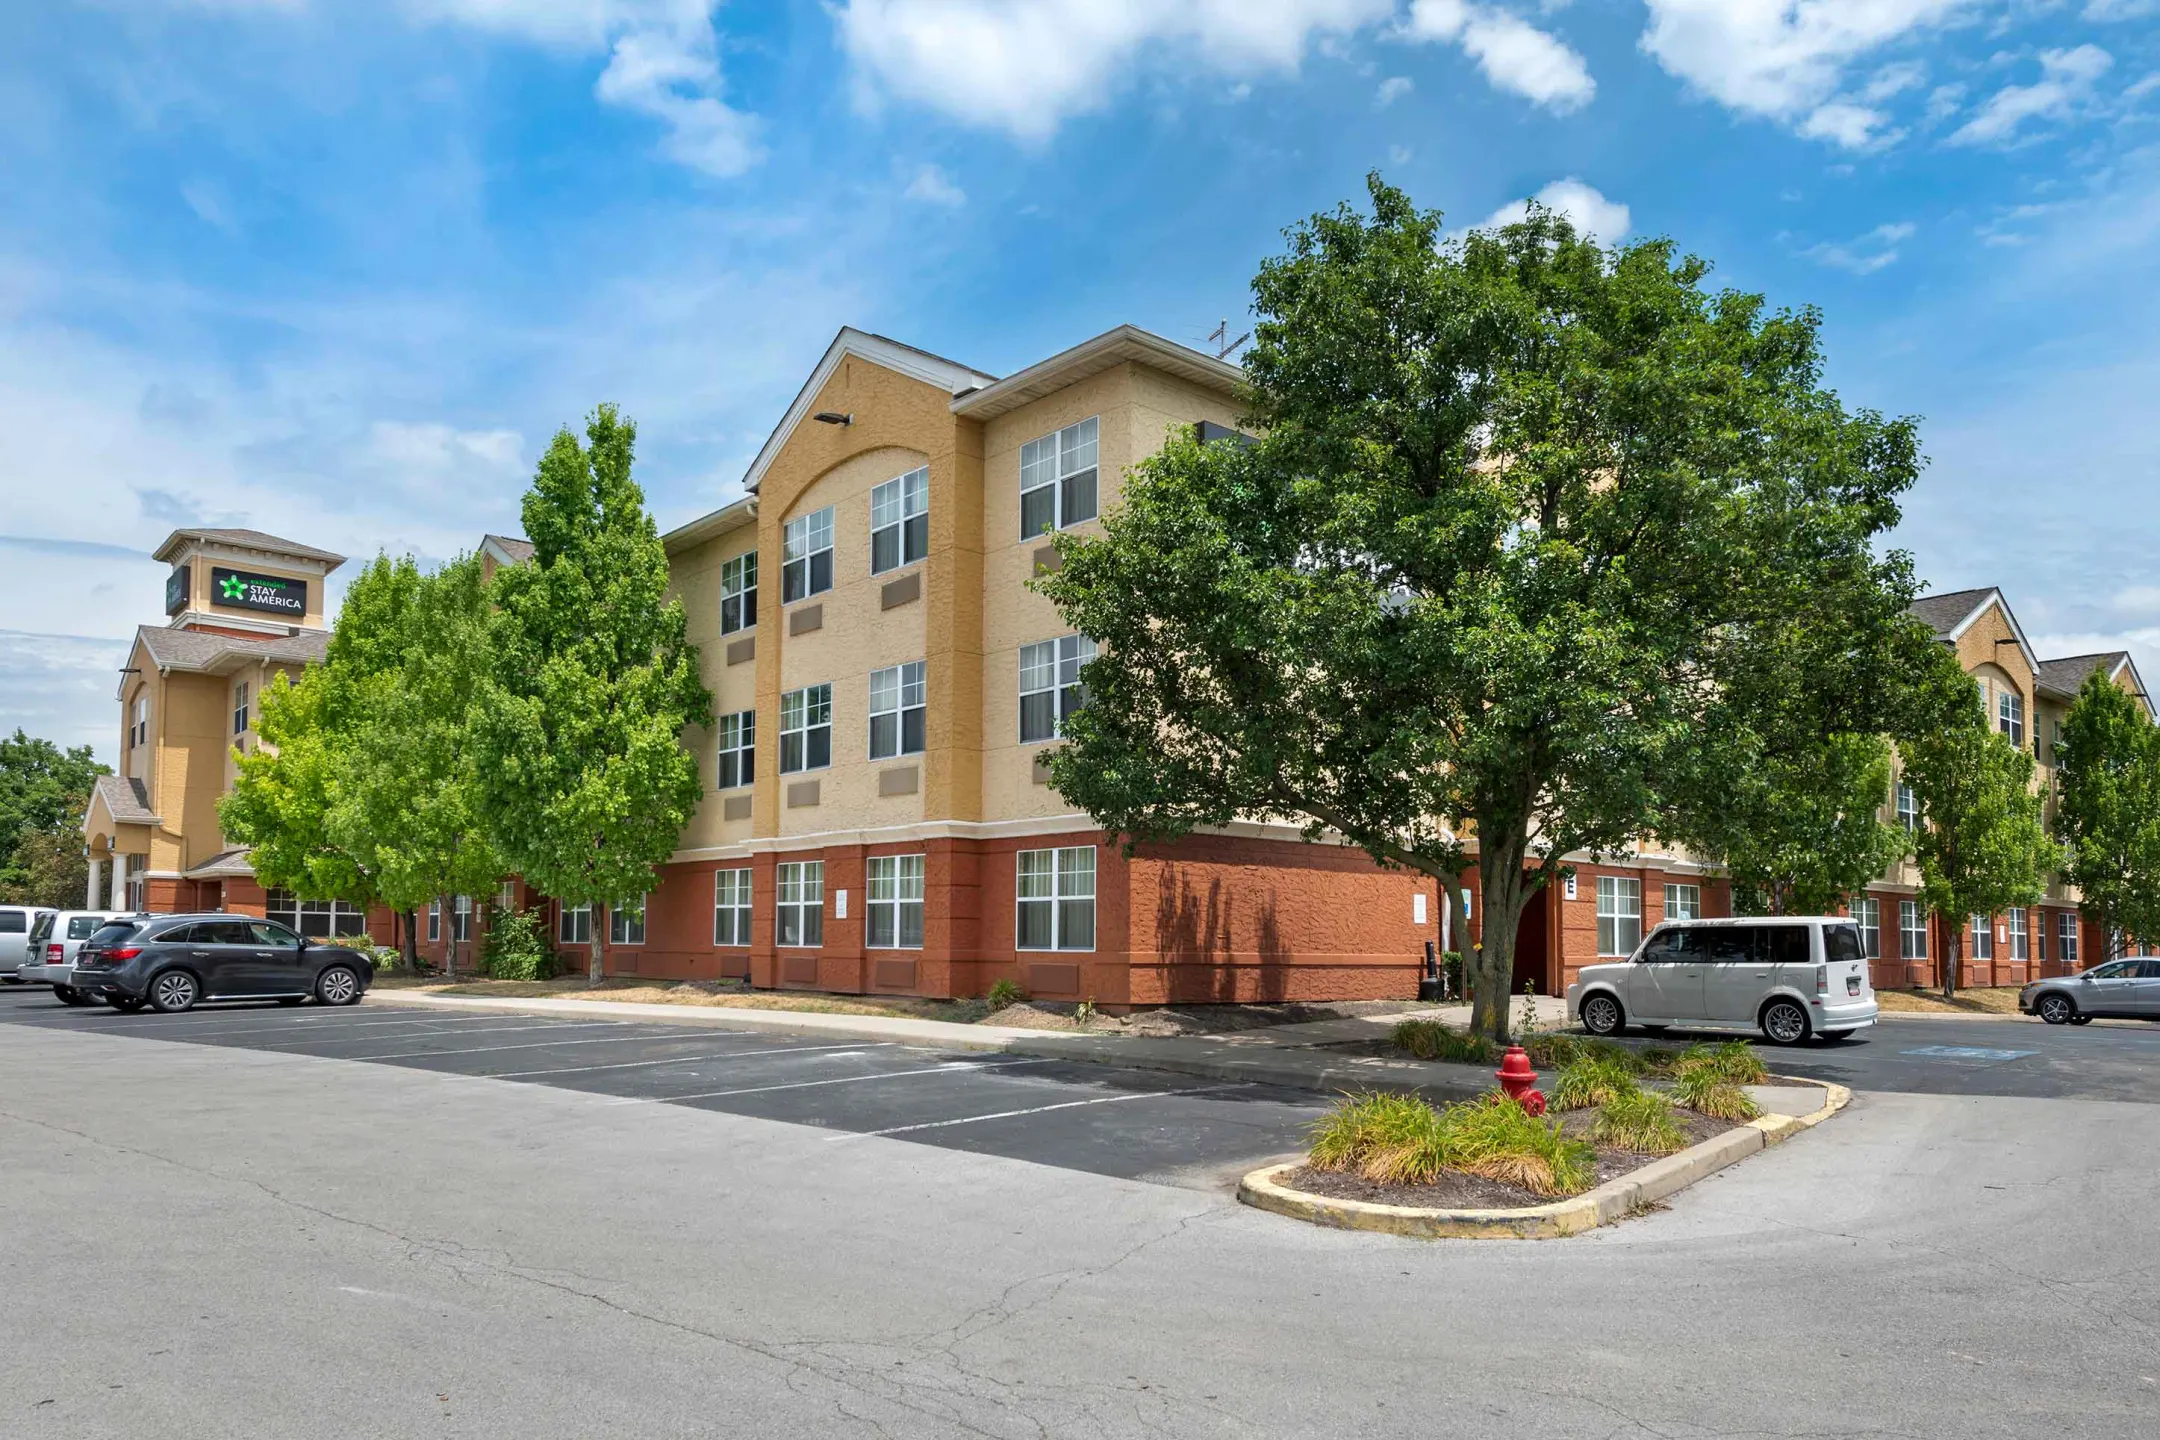 Building - Furnished Studio - Indianapolis - Airport - W. Southern Ave. - Indianapolis, IN